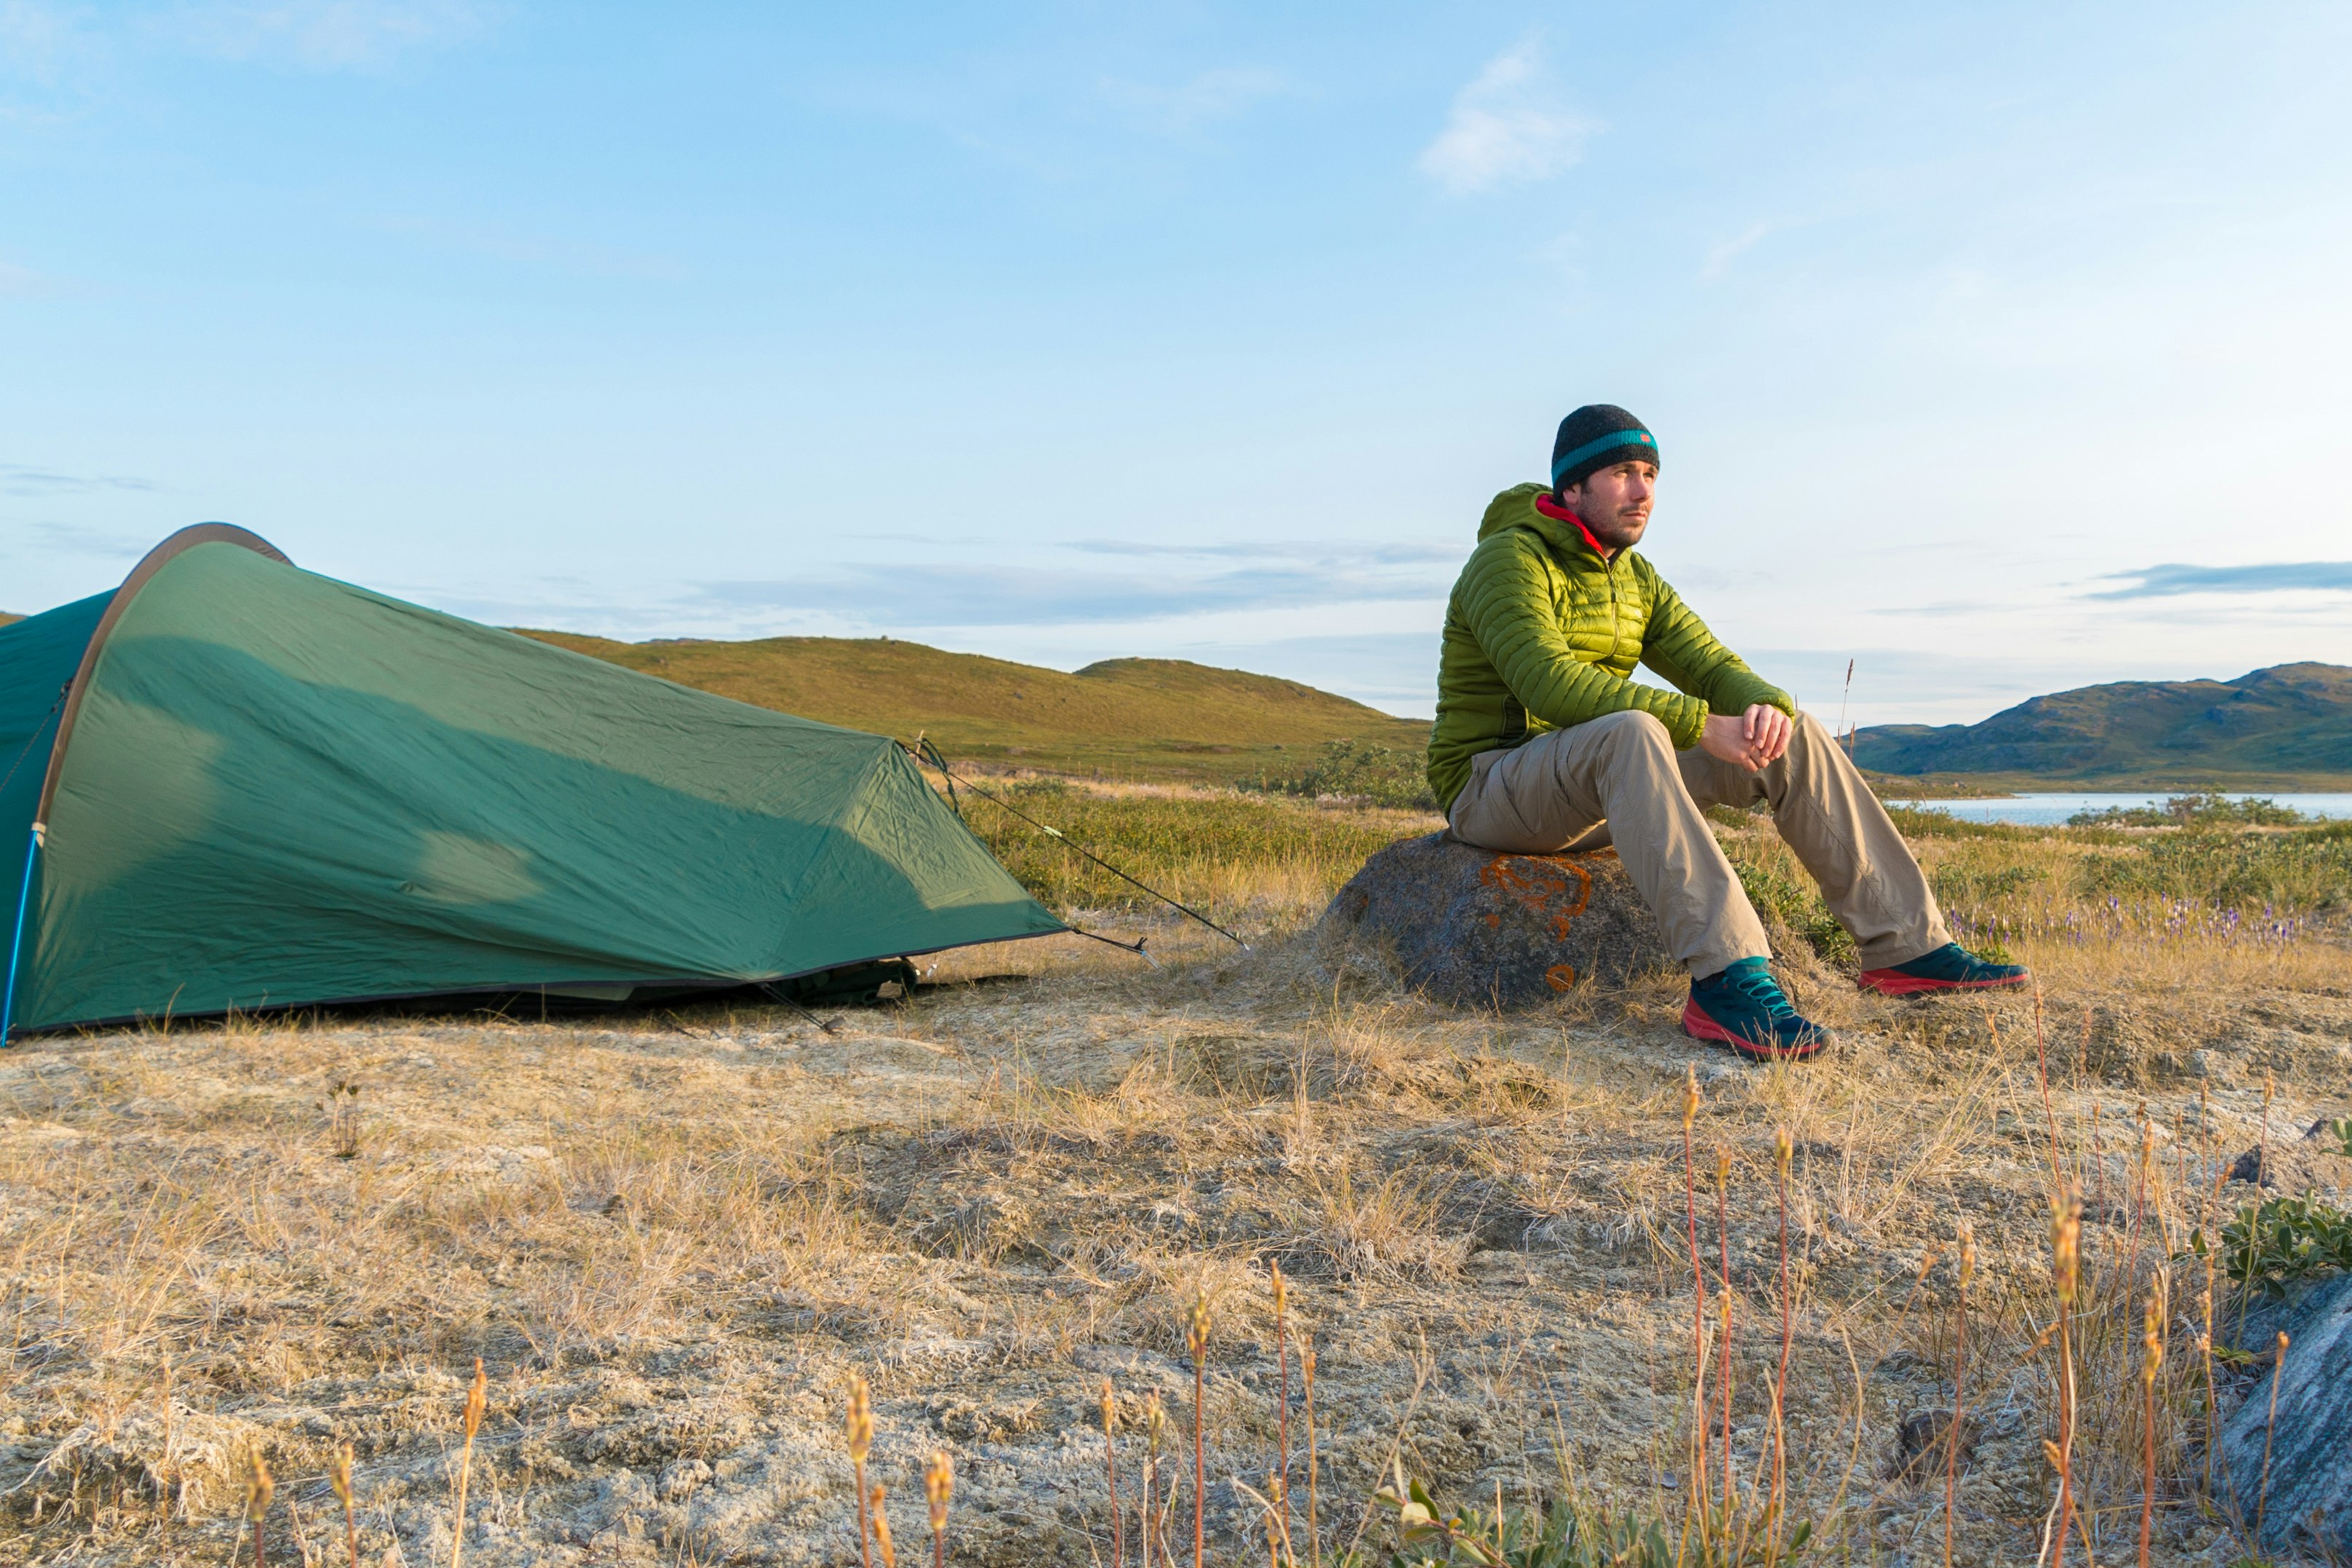 Peter sits on a rock next to his green tent admiring the Arctic scenery of lakes and green hills.